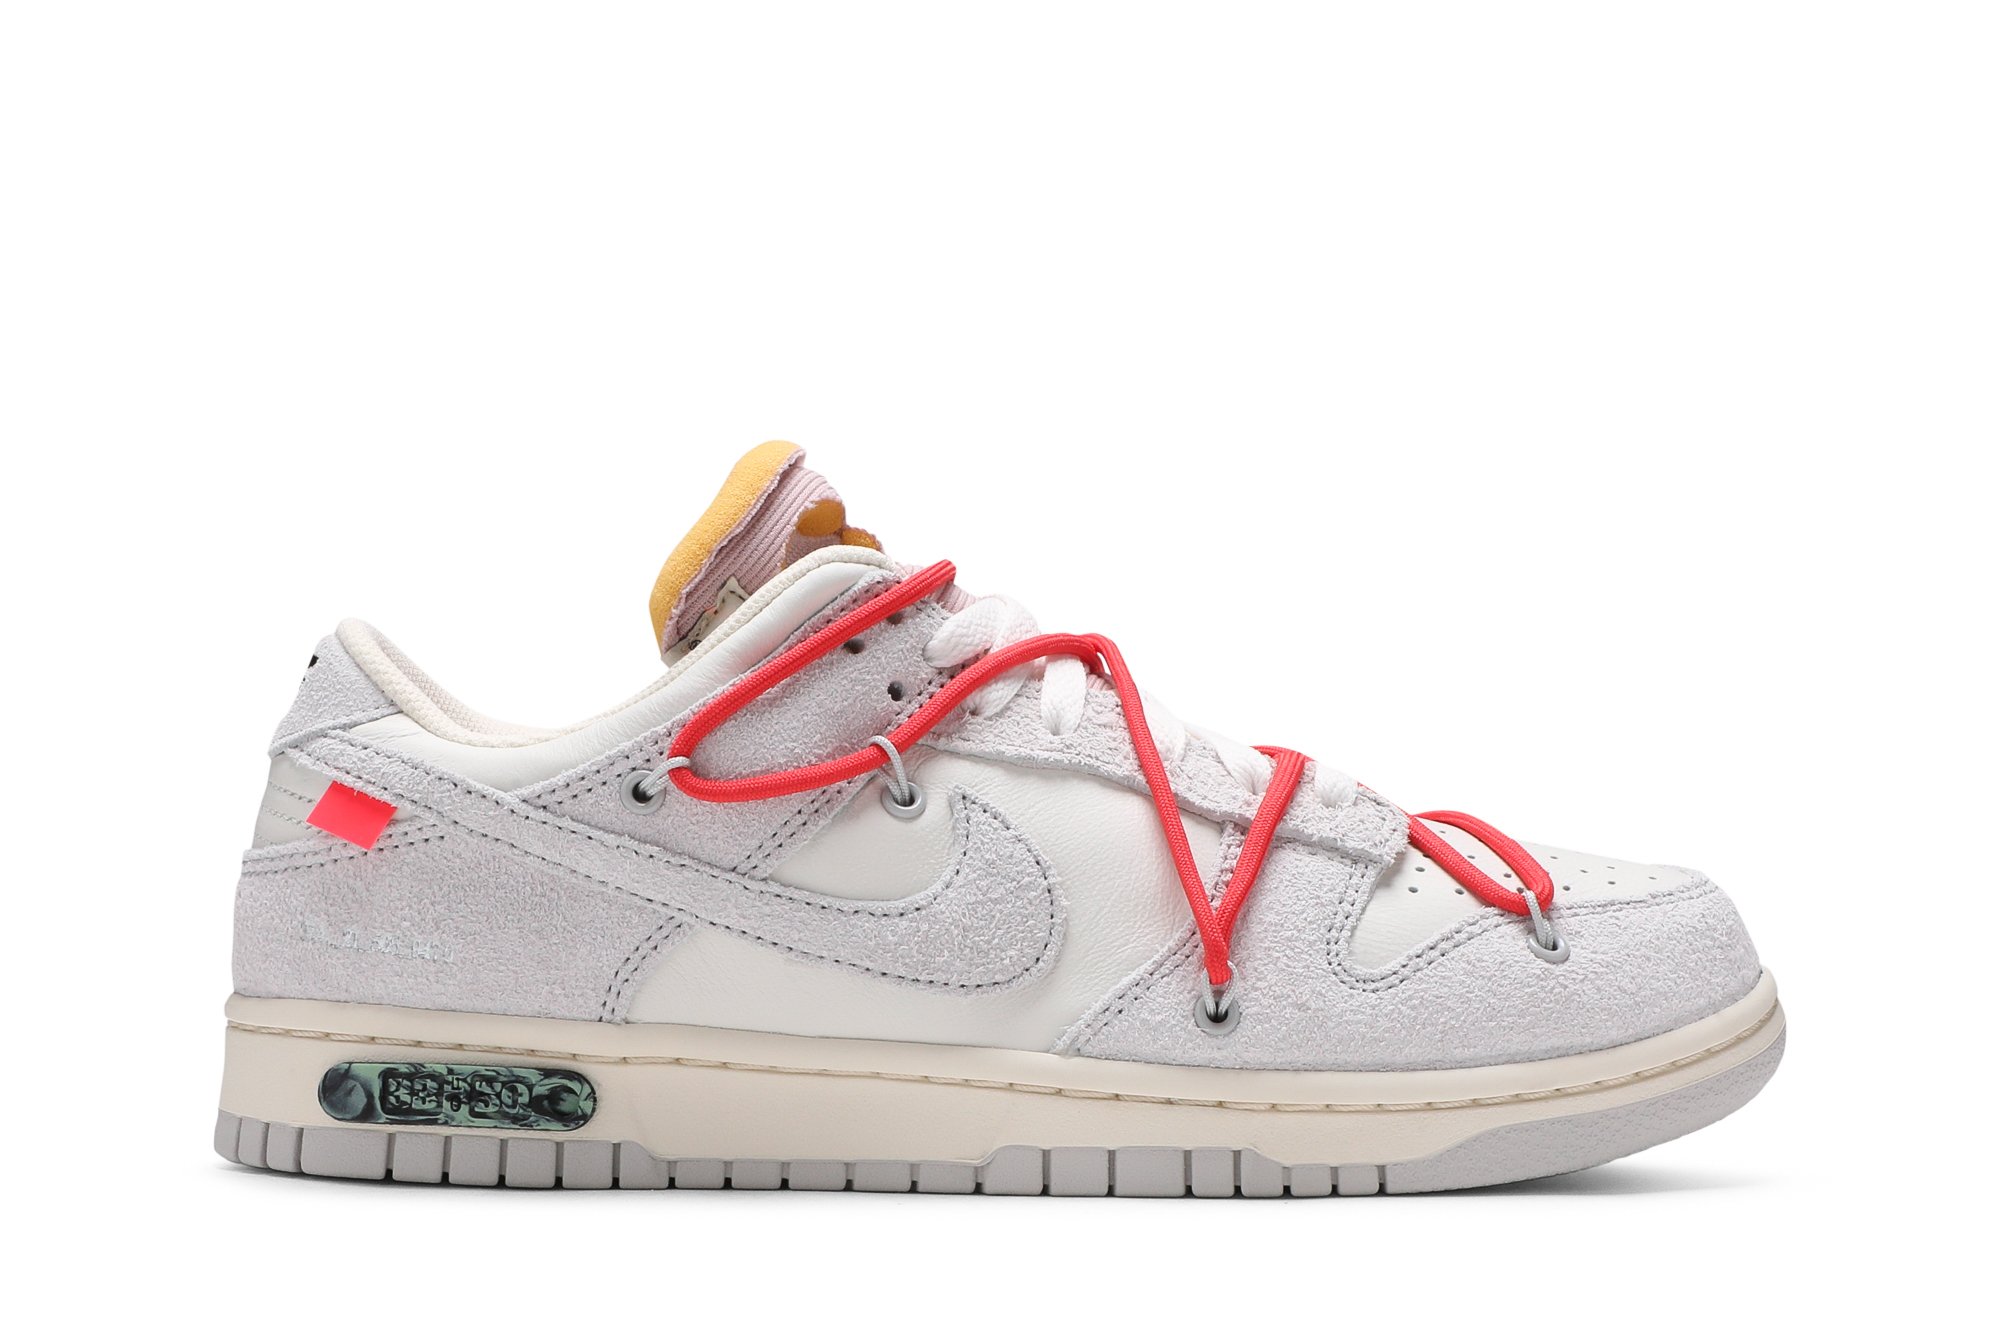 Buy Off-White x Dunk Low 'Lot 33 of 50' - DJ0950 118 | GOAT CA